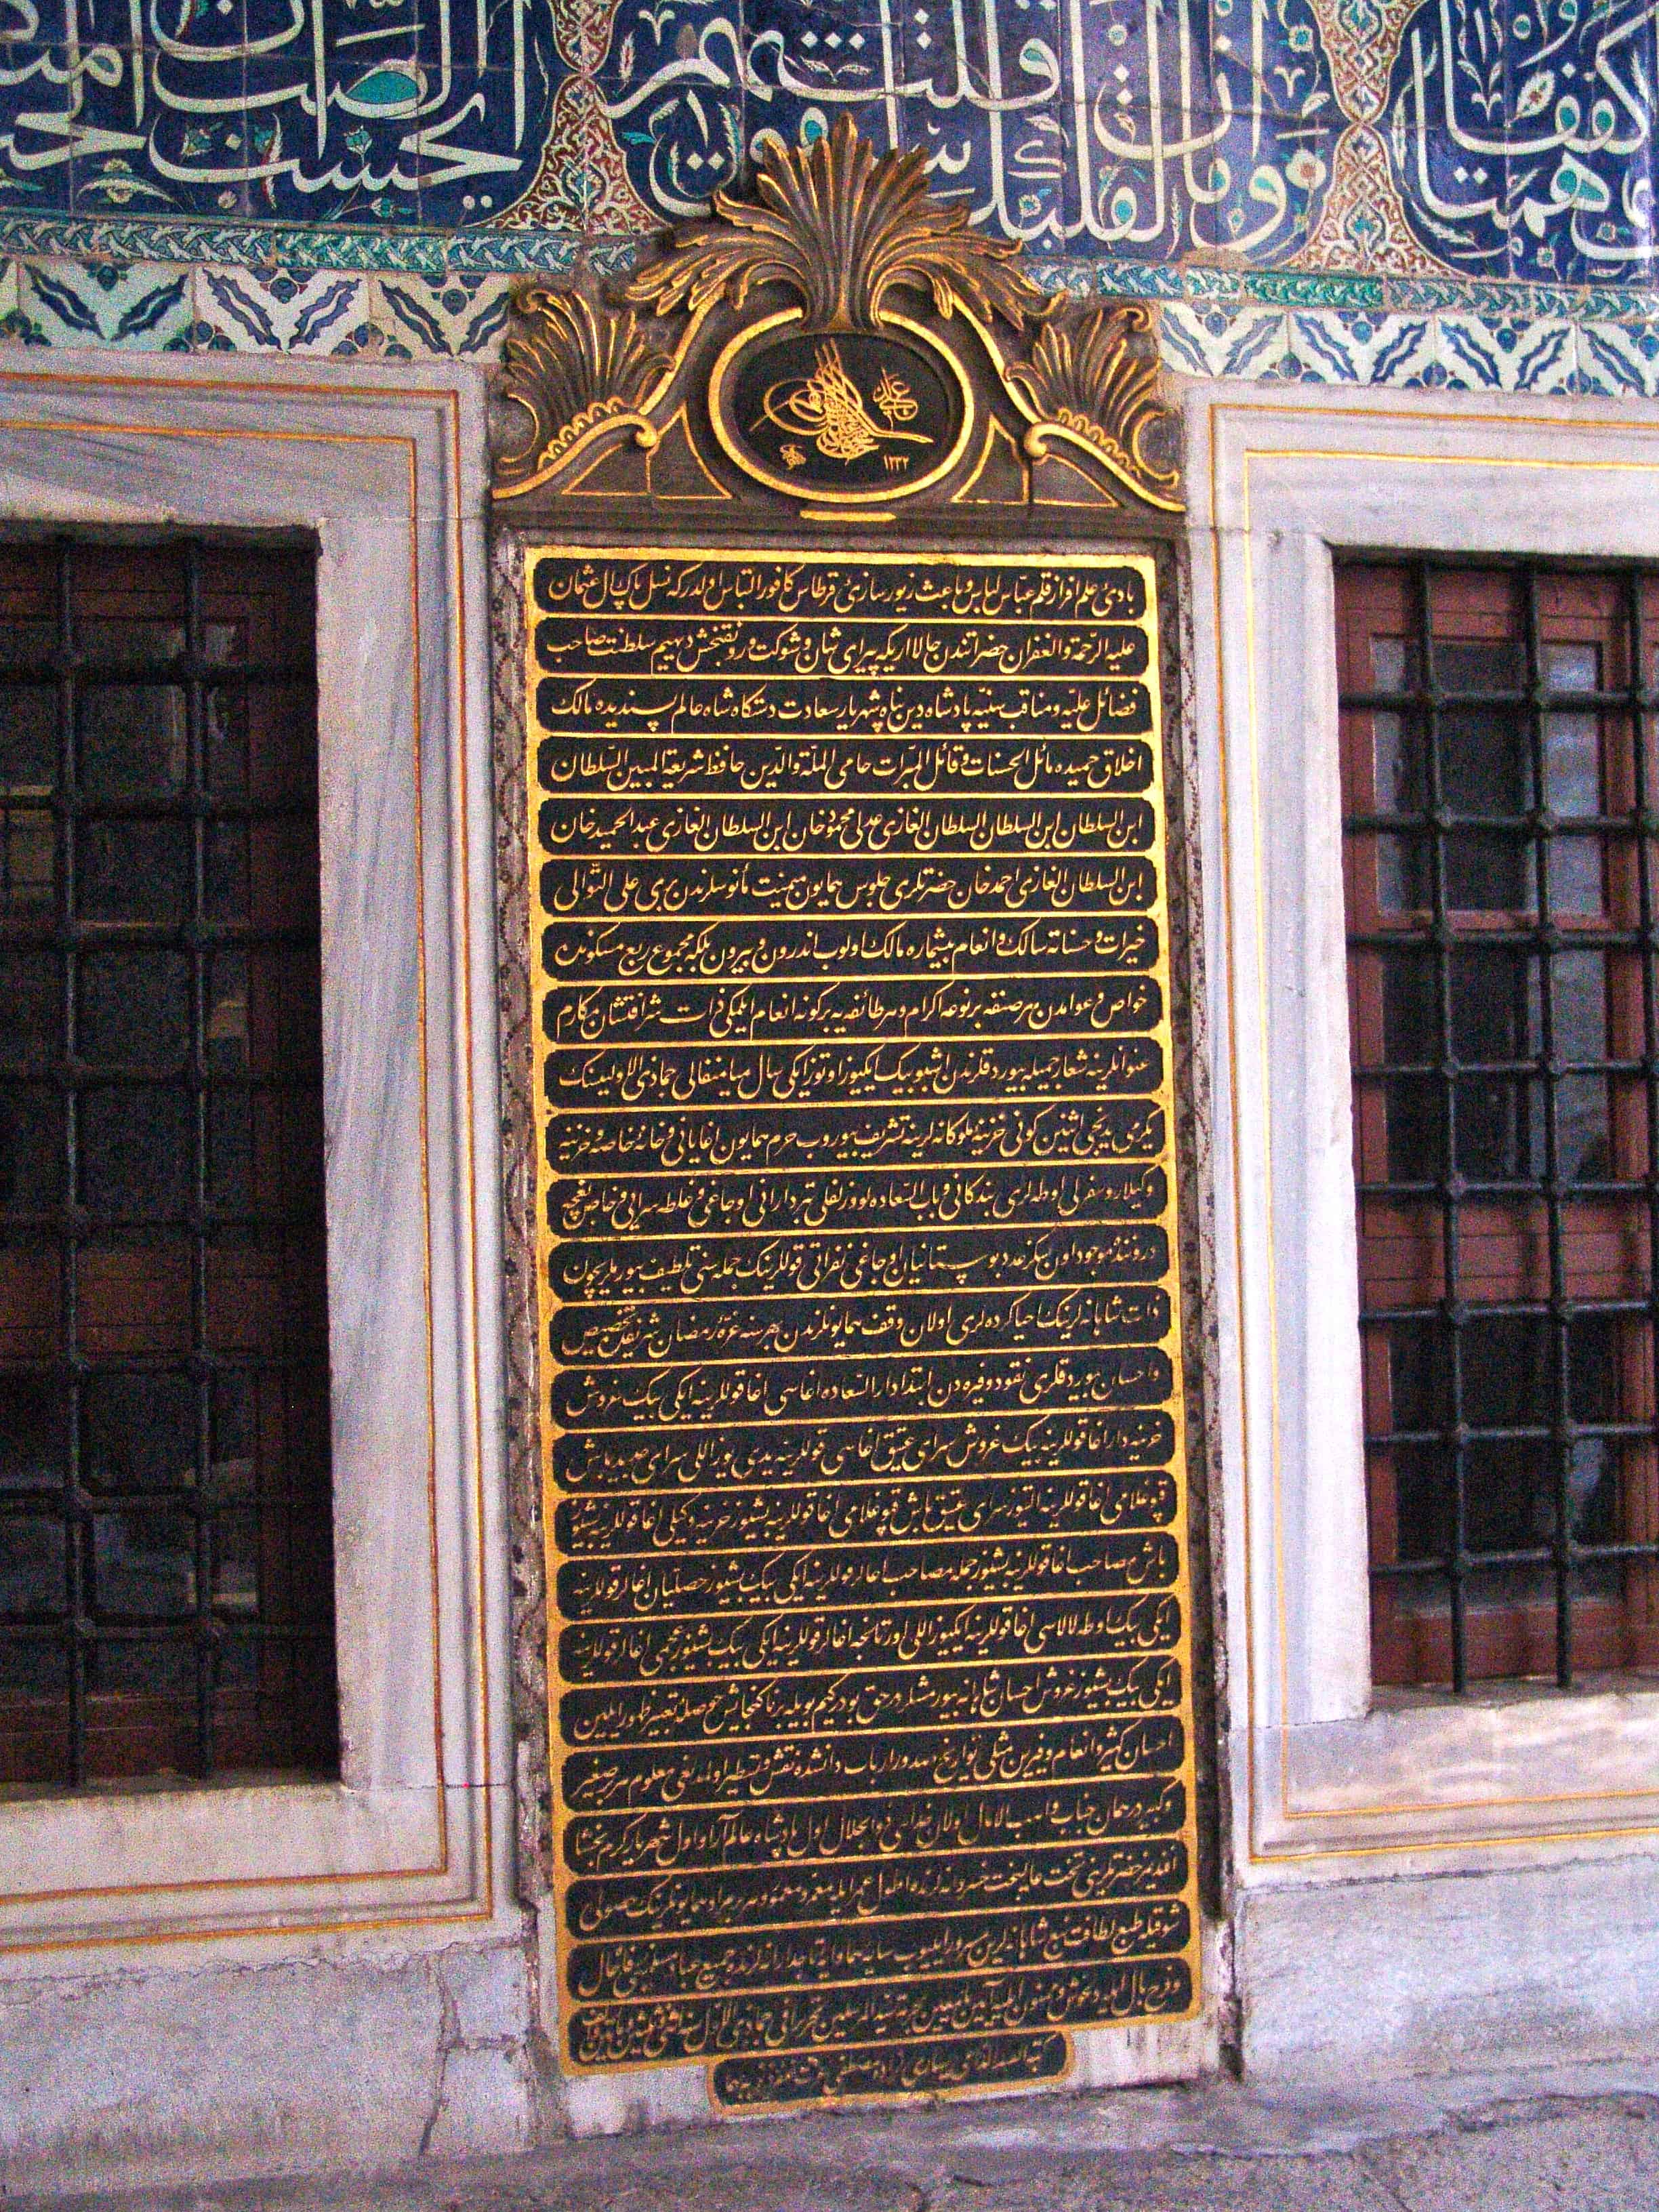 Inscription on the Apartments of the Black Eunuchs in the Imperial Harem at Topkapi Palace in Istanbul, Turkey